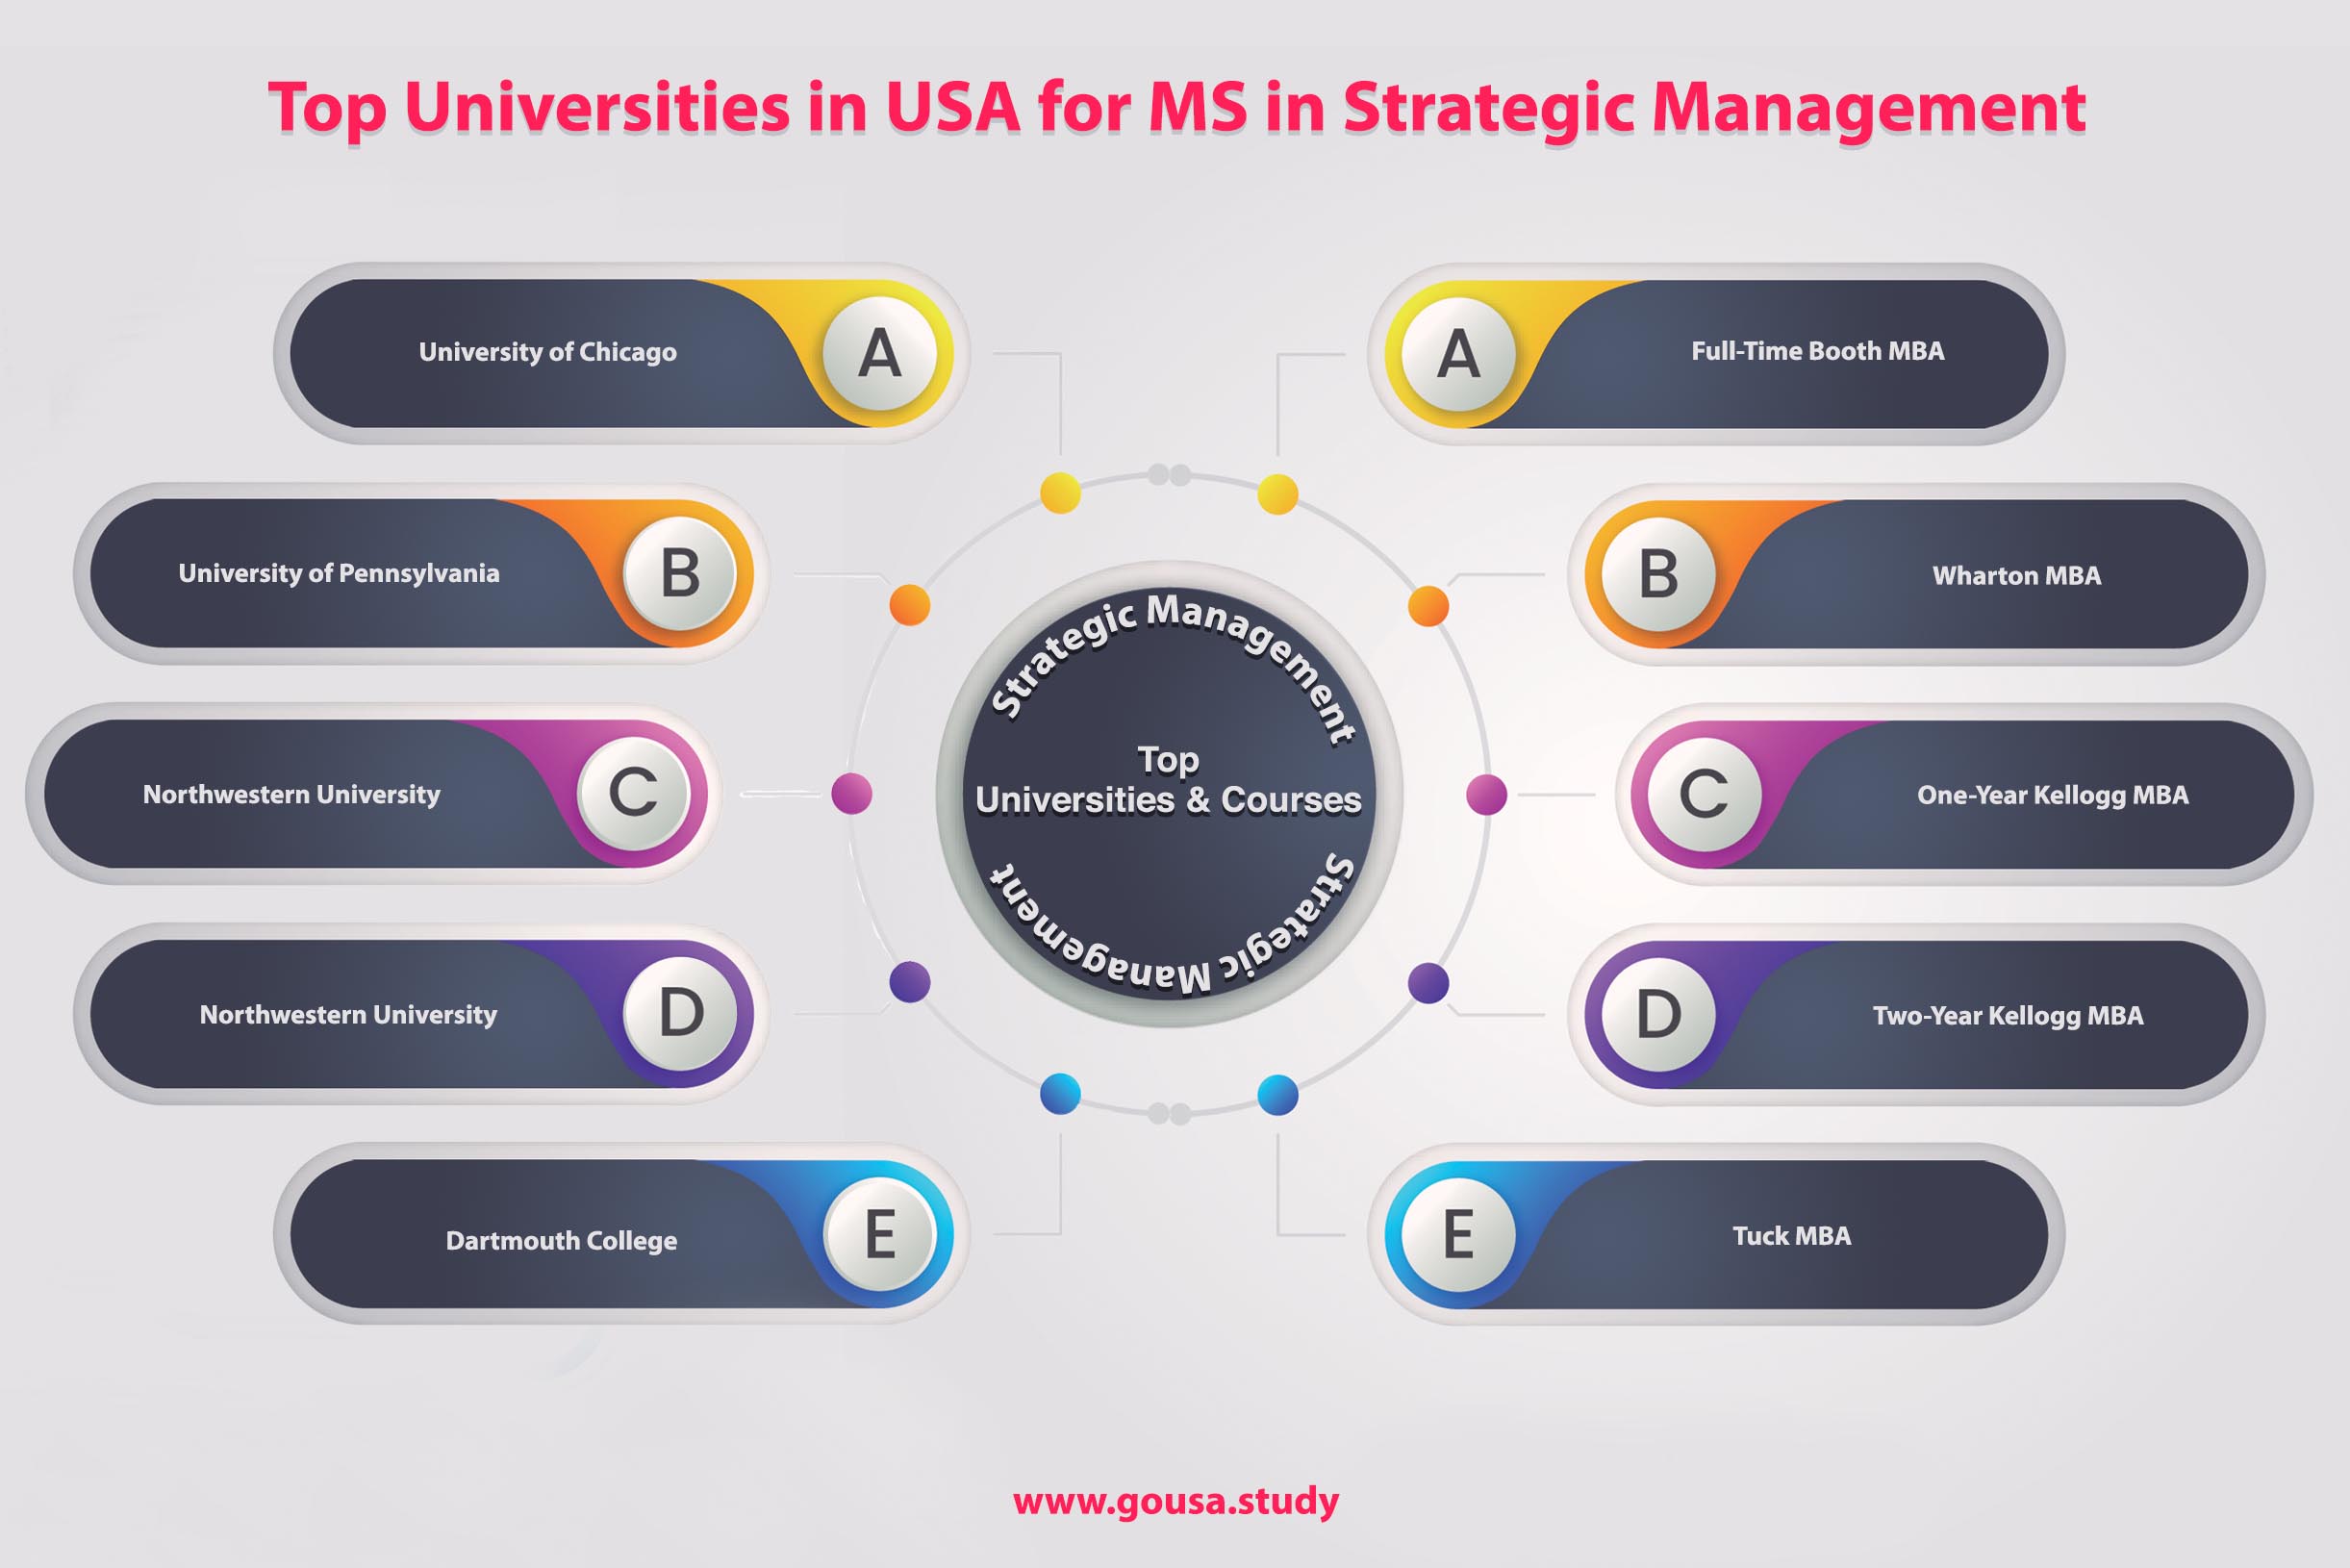 Top Universities in USA for MS in Strategic Management